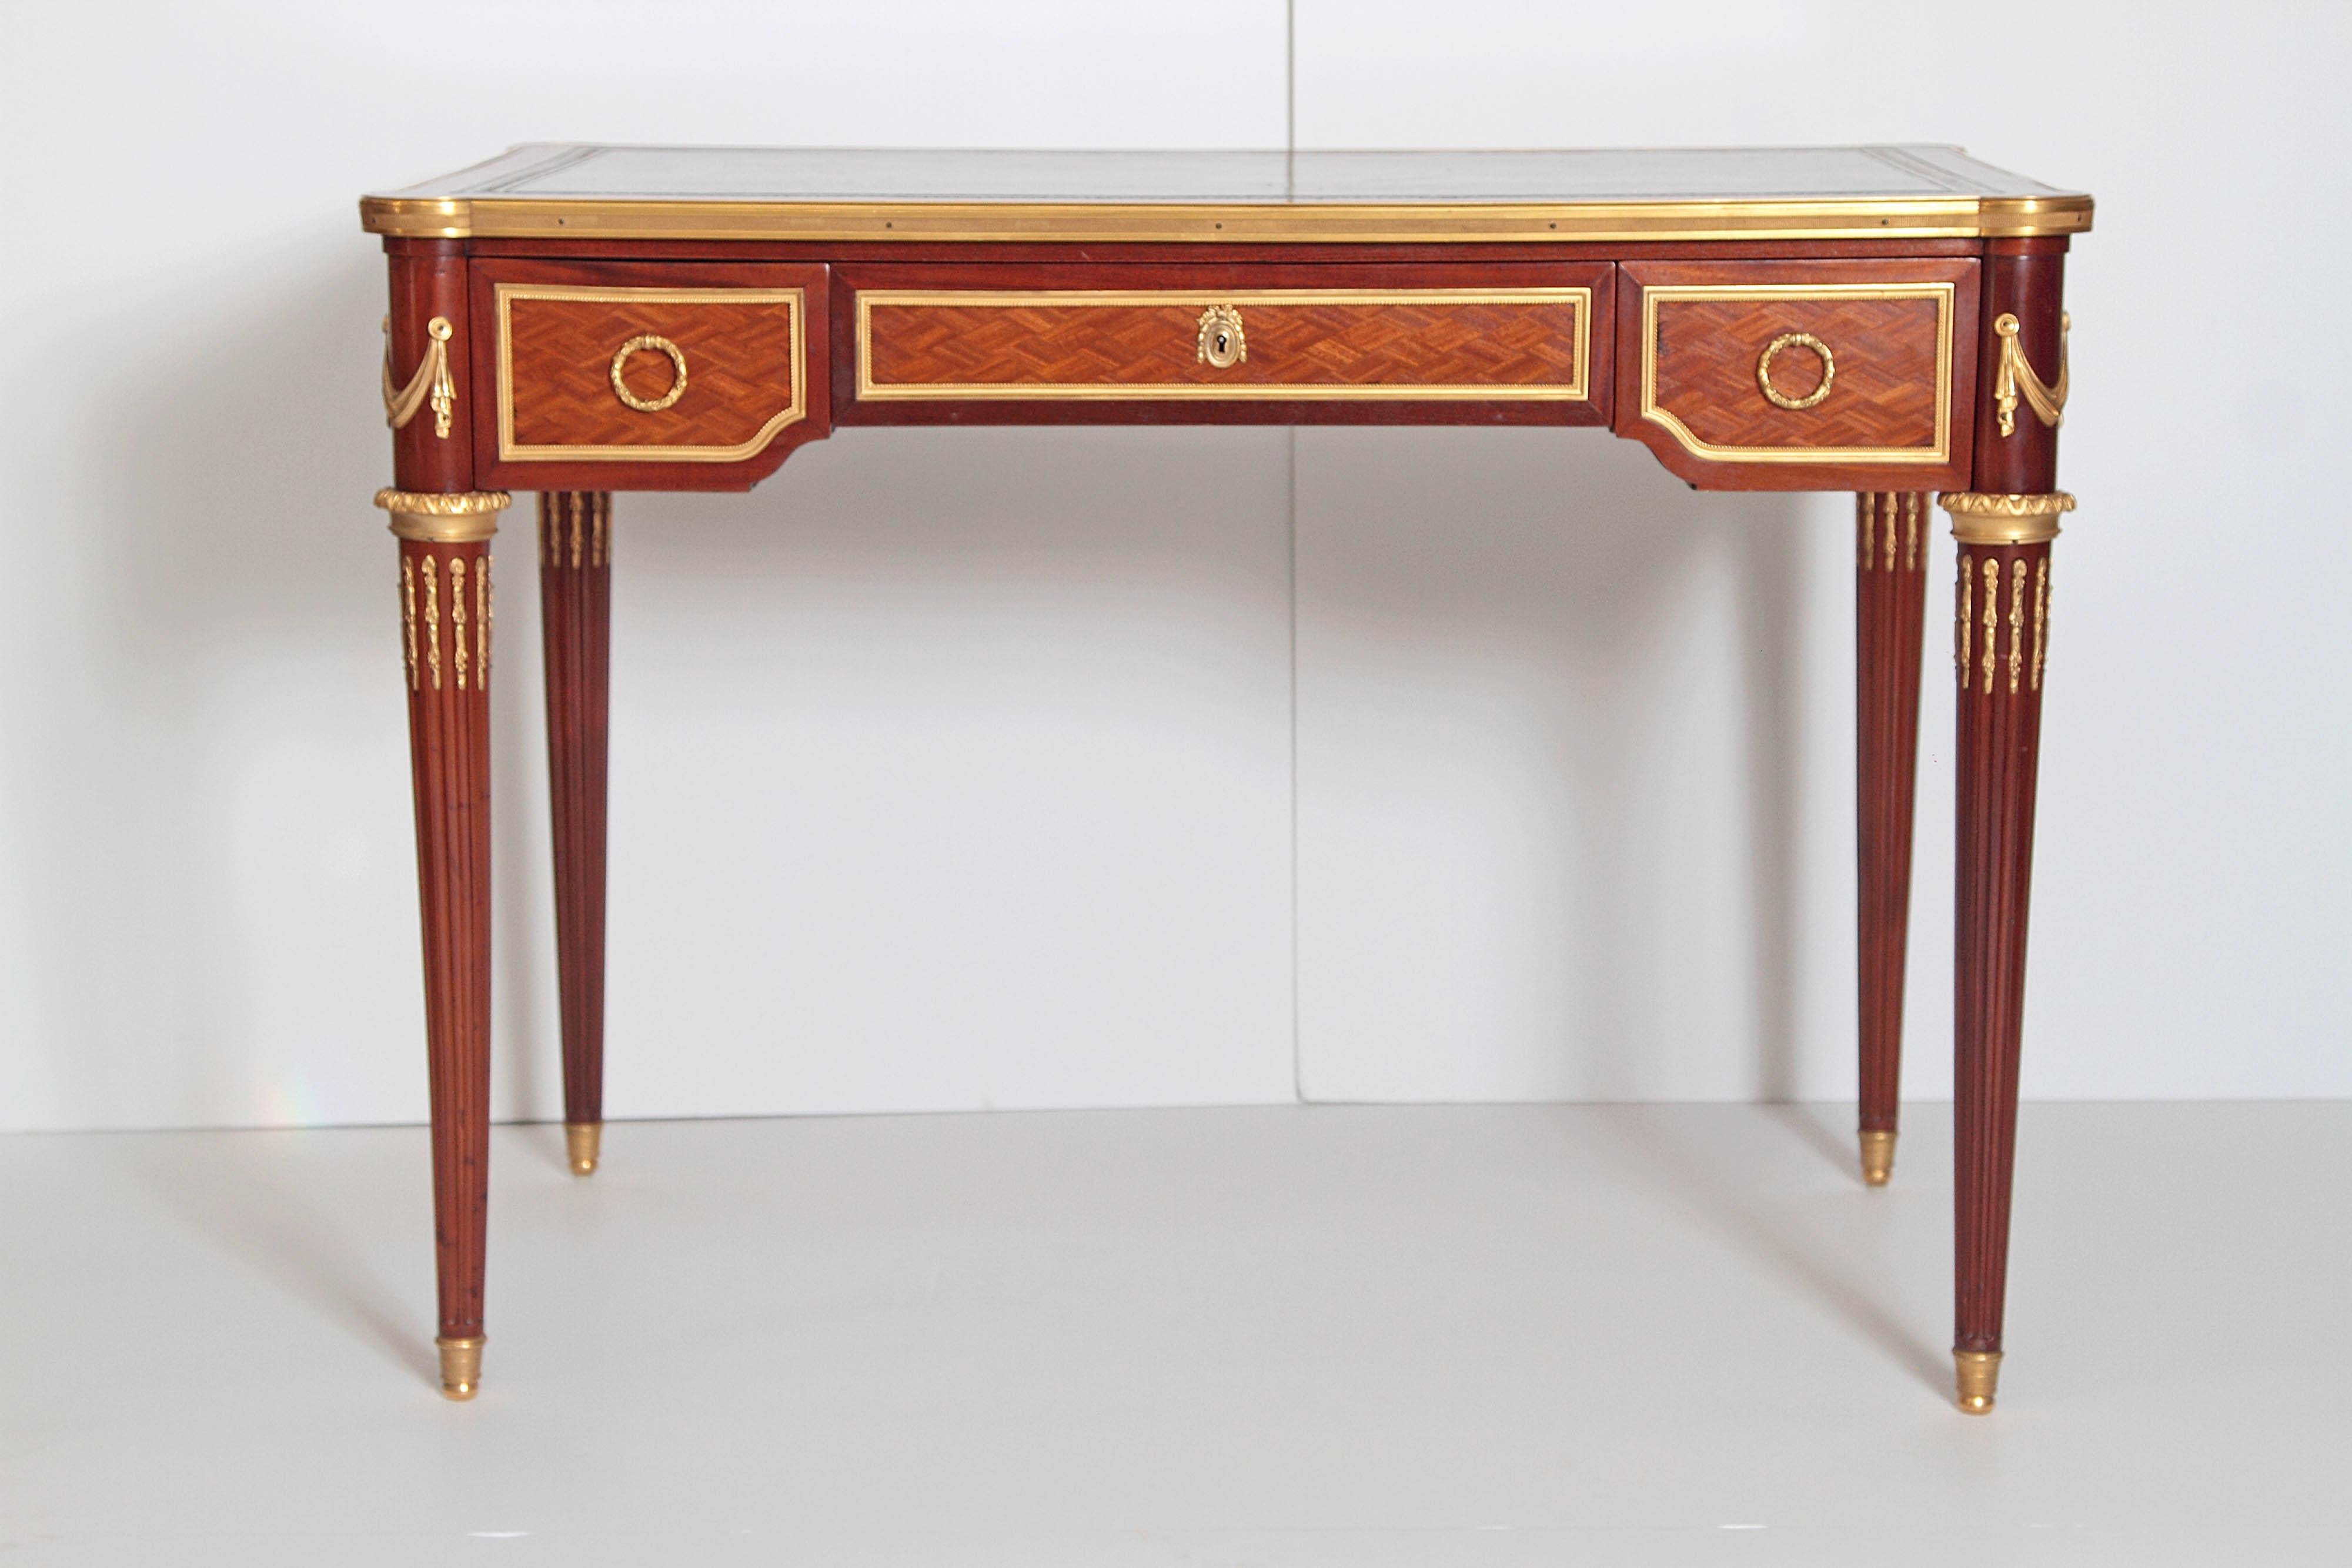 A French Louis XVI style writing table of mahogany. Two small drawers flank larger center drawer. Parquetry inlay on drawer fronts. Green leather top with gilt stamped decoration. Reeded tapered legs with gilt bronze mounts, early 19th century,